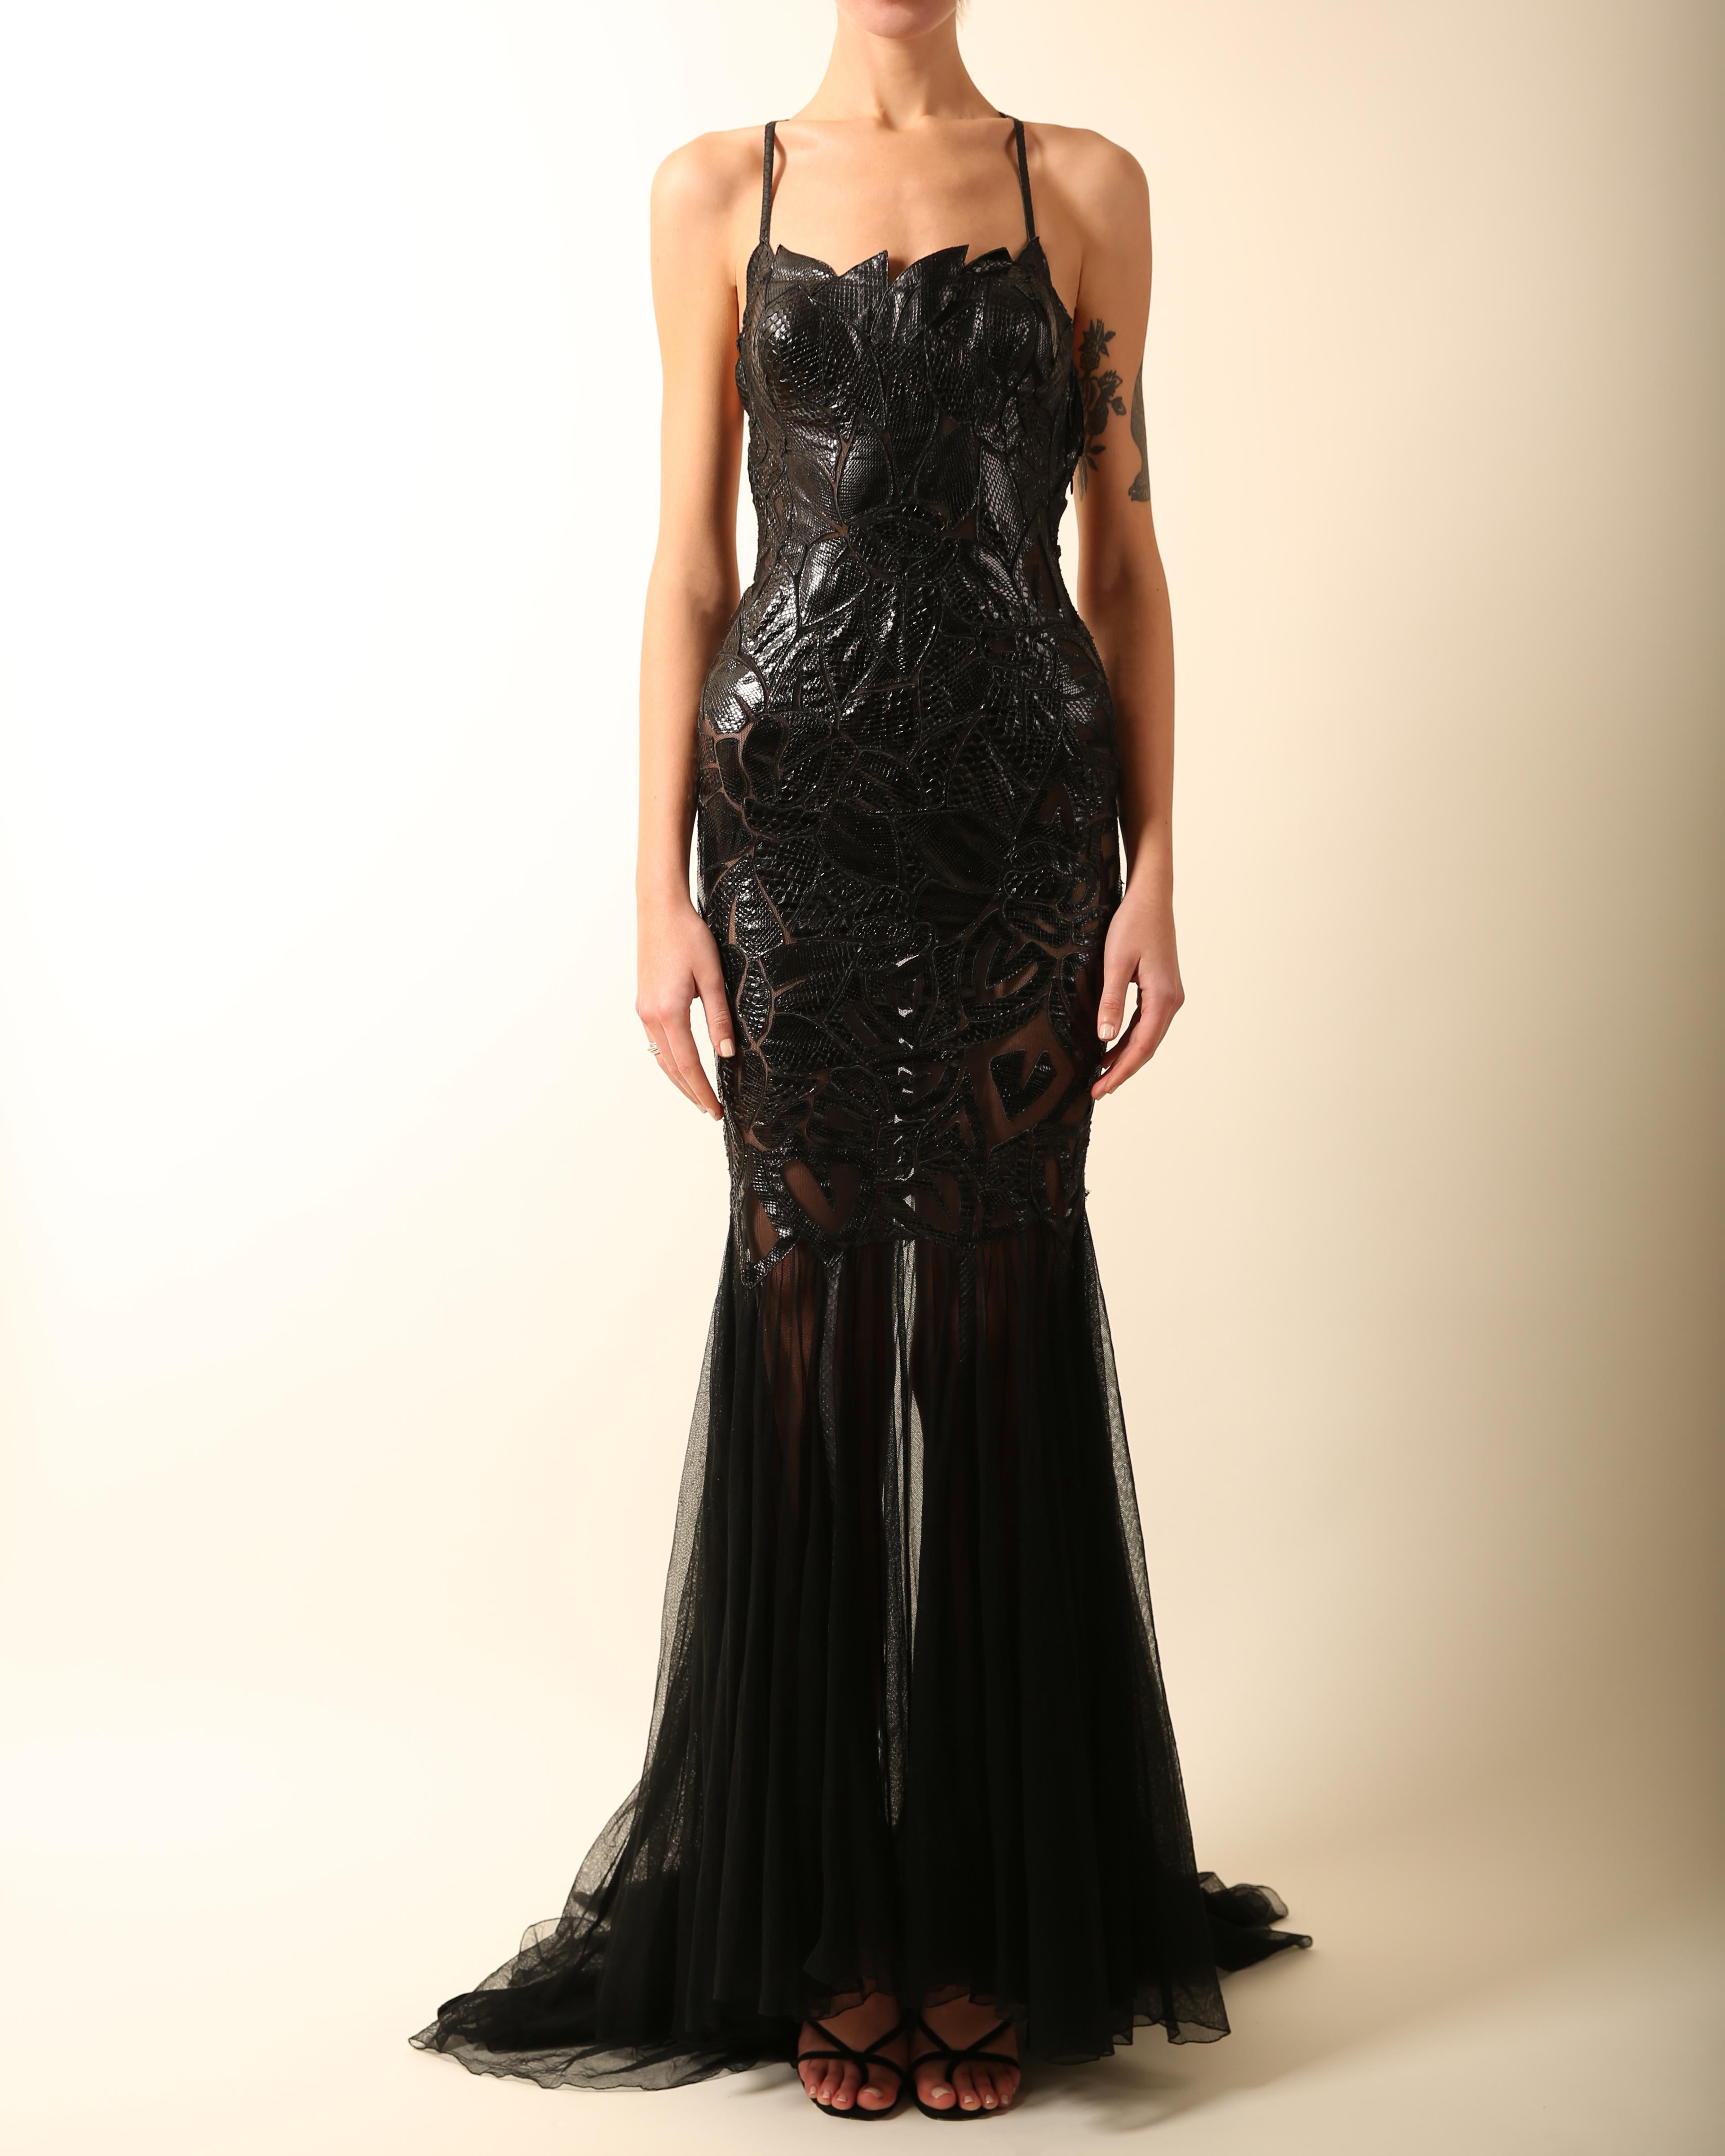 LOVE LALI Vintage

Atelier Versace
An absolutely breathtaking and incredibly rare gown in black cut out patent python and sheer mesh
Spaghetti straps that criss cross at the back doing up one side via a popper
A very low cut backless cut
Reinforced